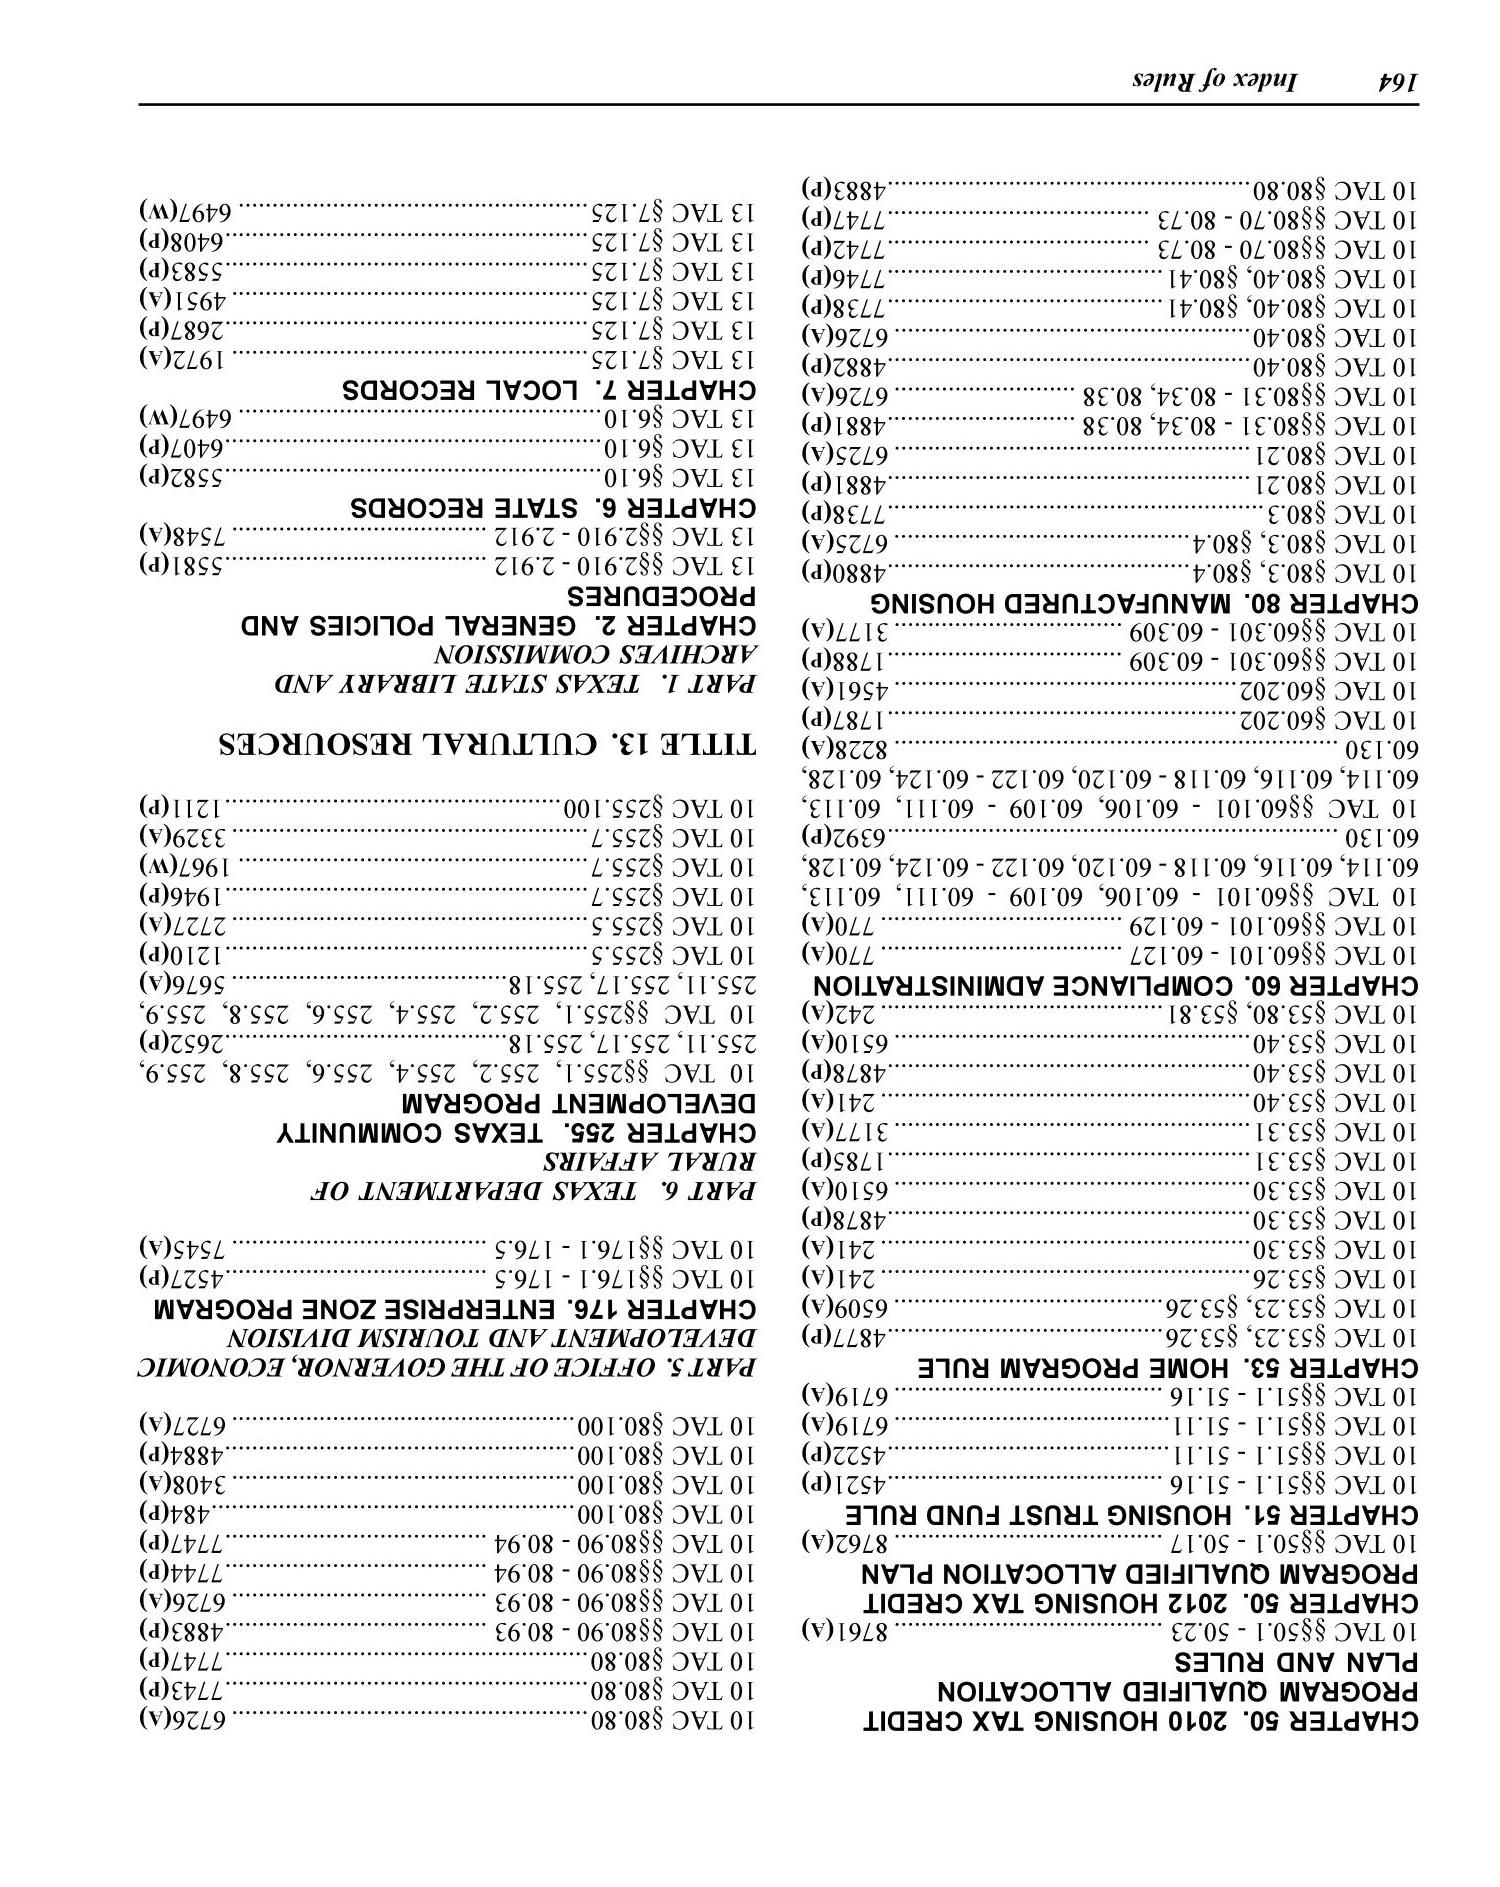 Texas Register: Annual Index January 1 - December 30, 2011, Index of Rules, Pages 153-200.
                                                
                                                    164
                                                